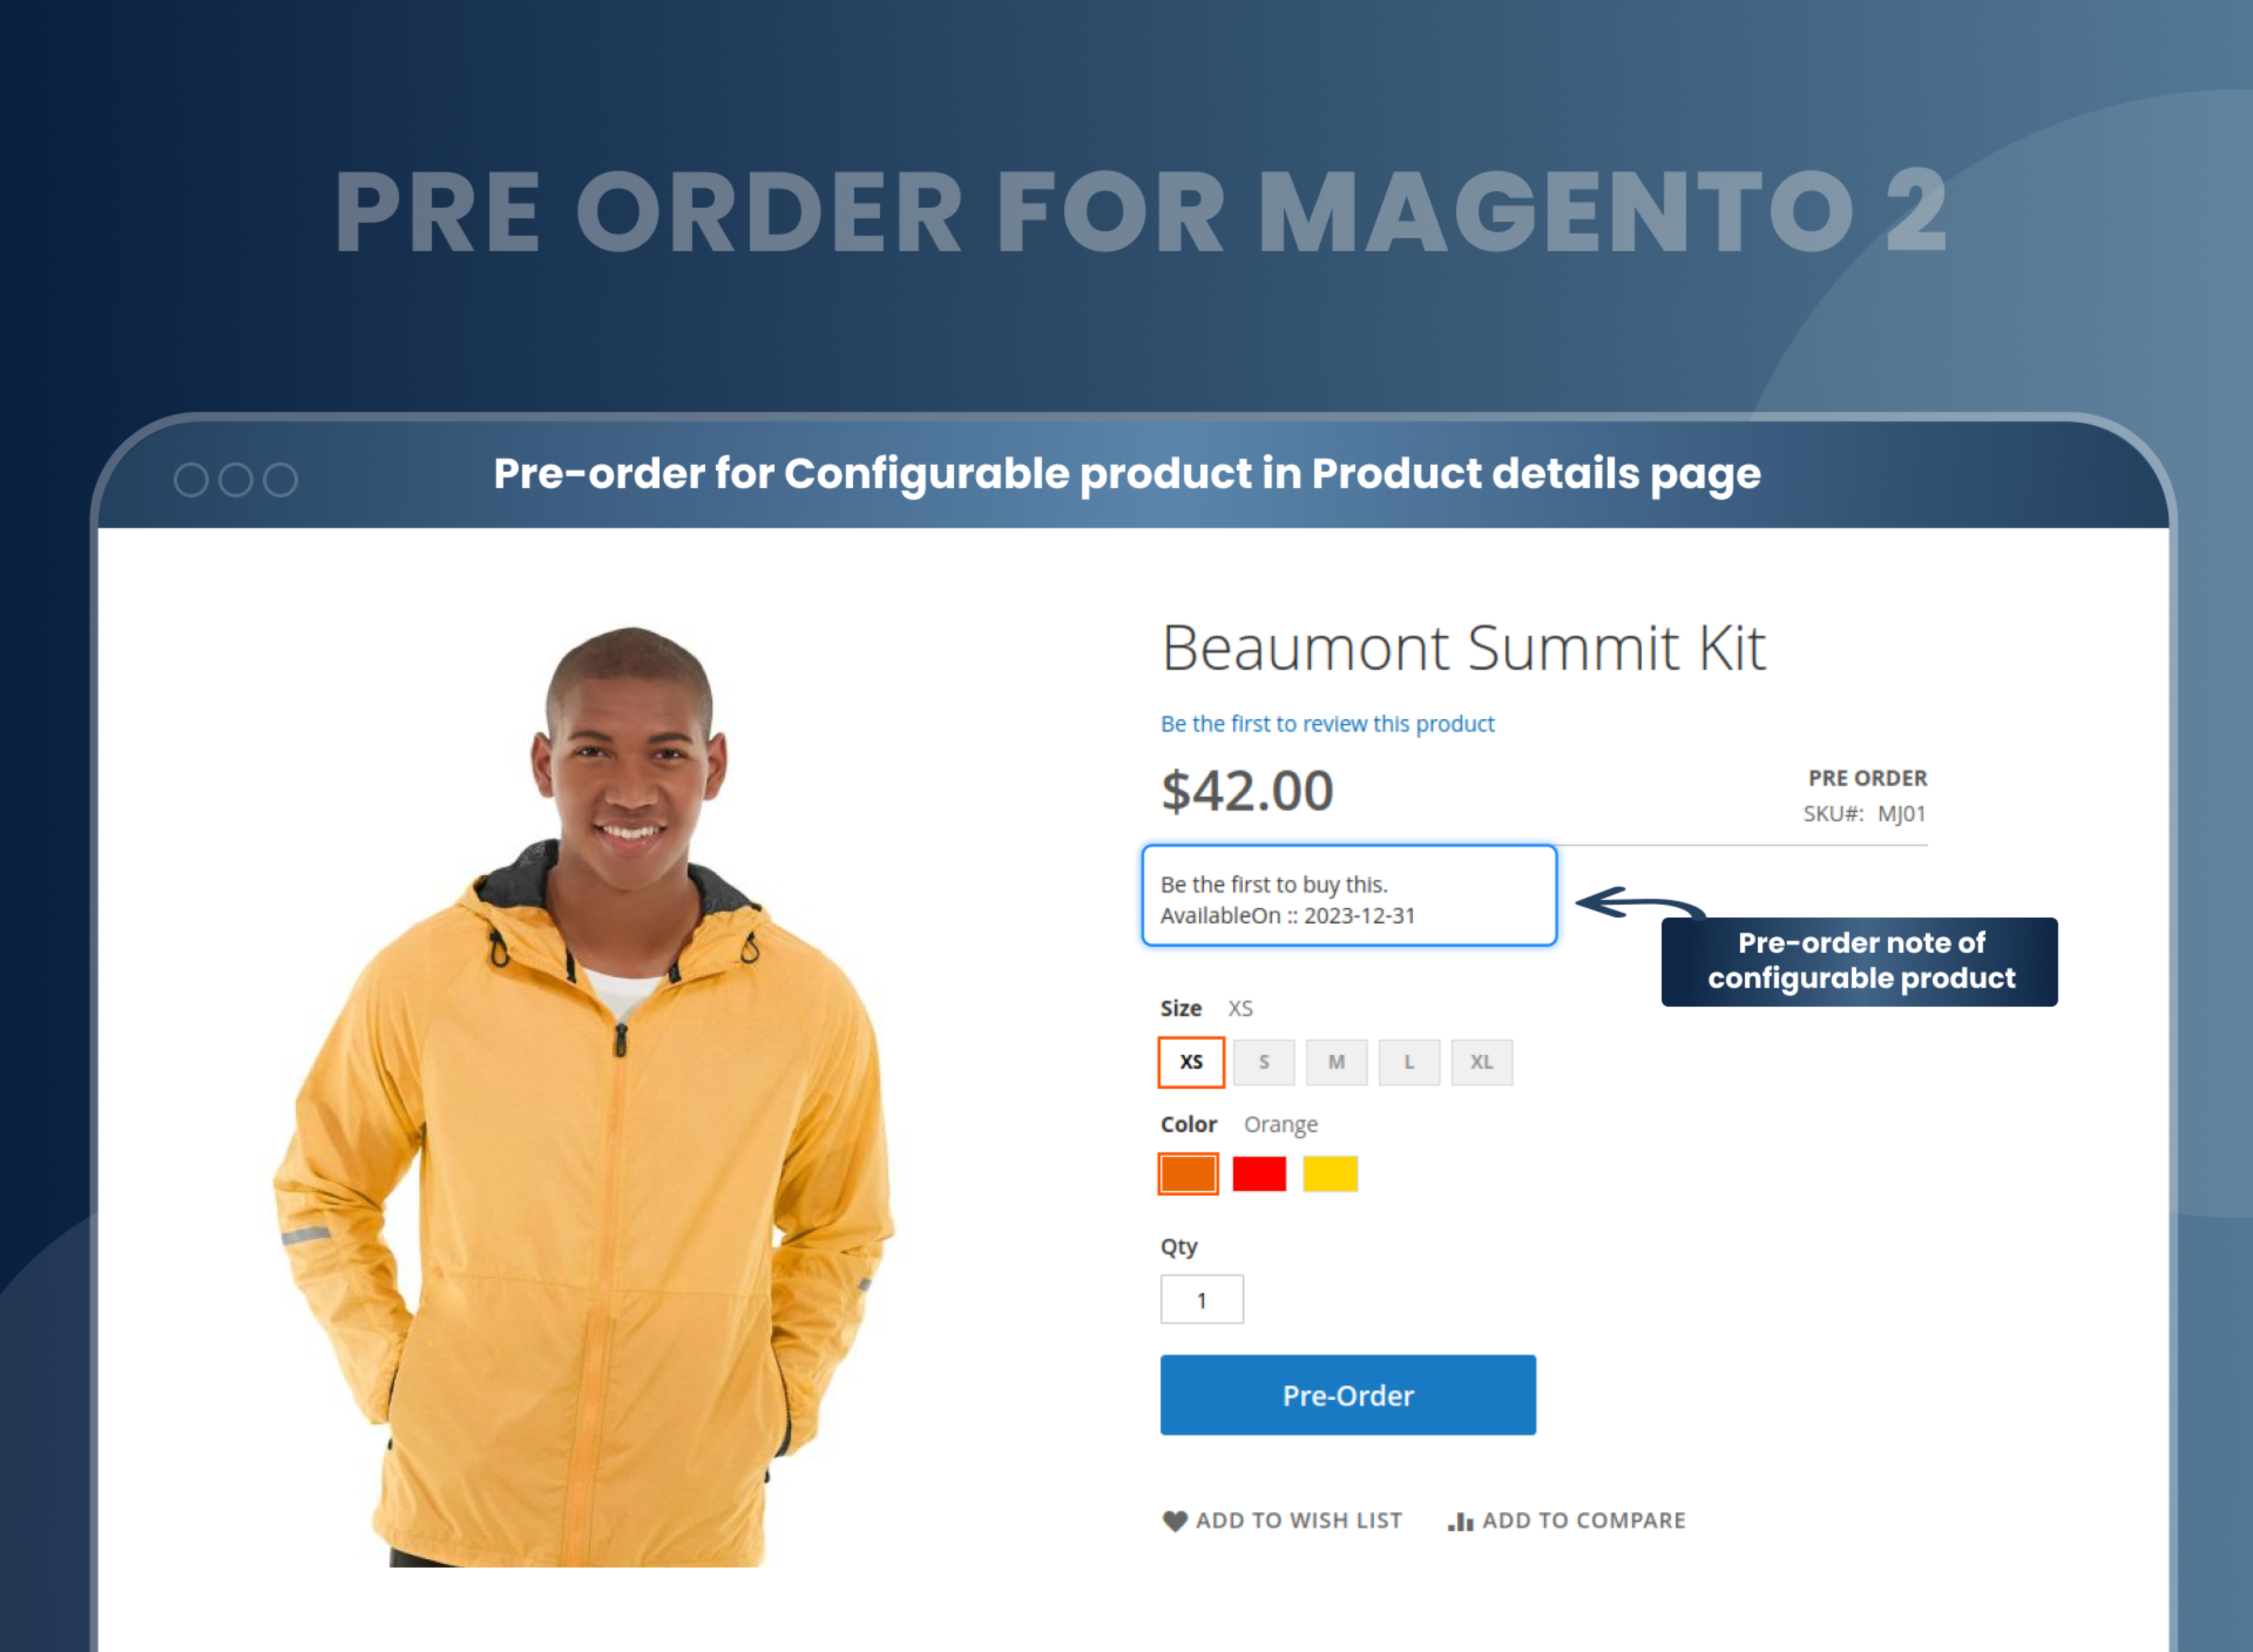 Pre-order for Configurable product in Product details page